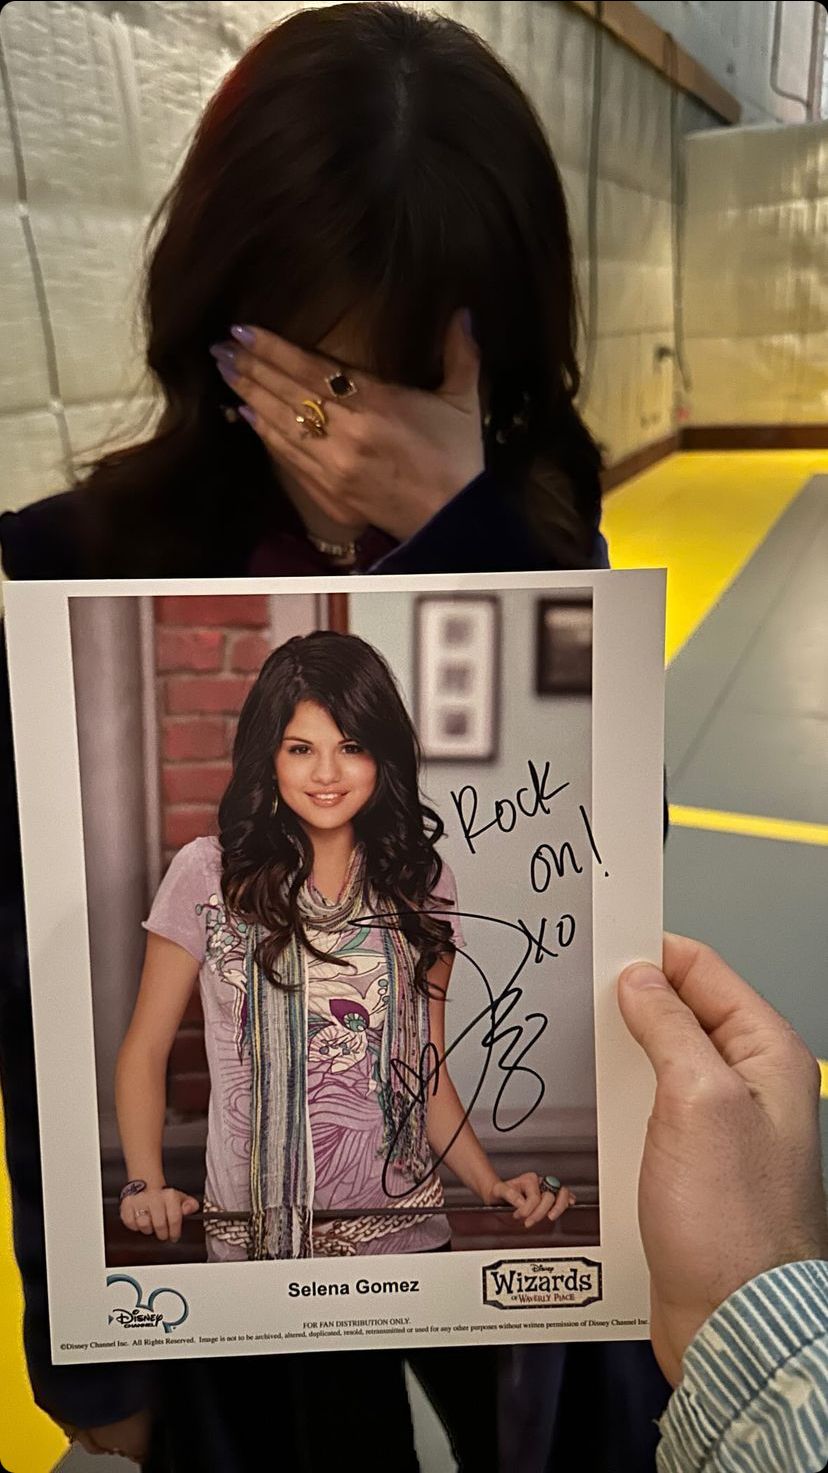 In his Instagram Stories, Blanco posted a photo holding an autographed picture of Selena during Wizards of Waverly Place. (Photo: Instagram)